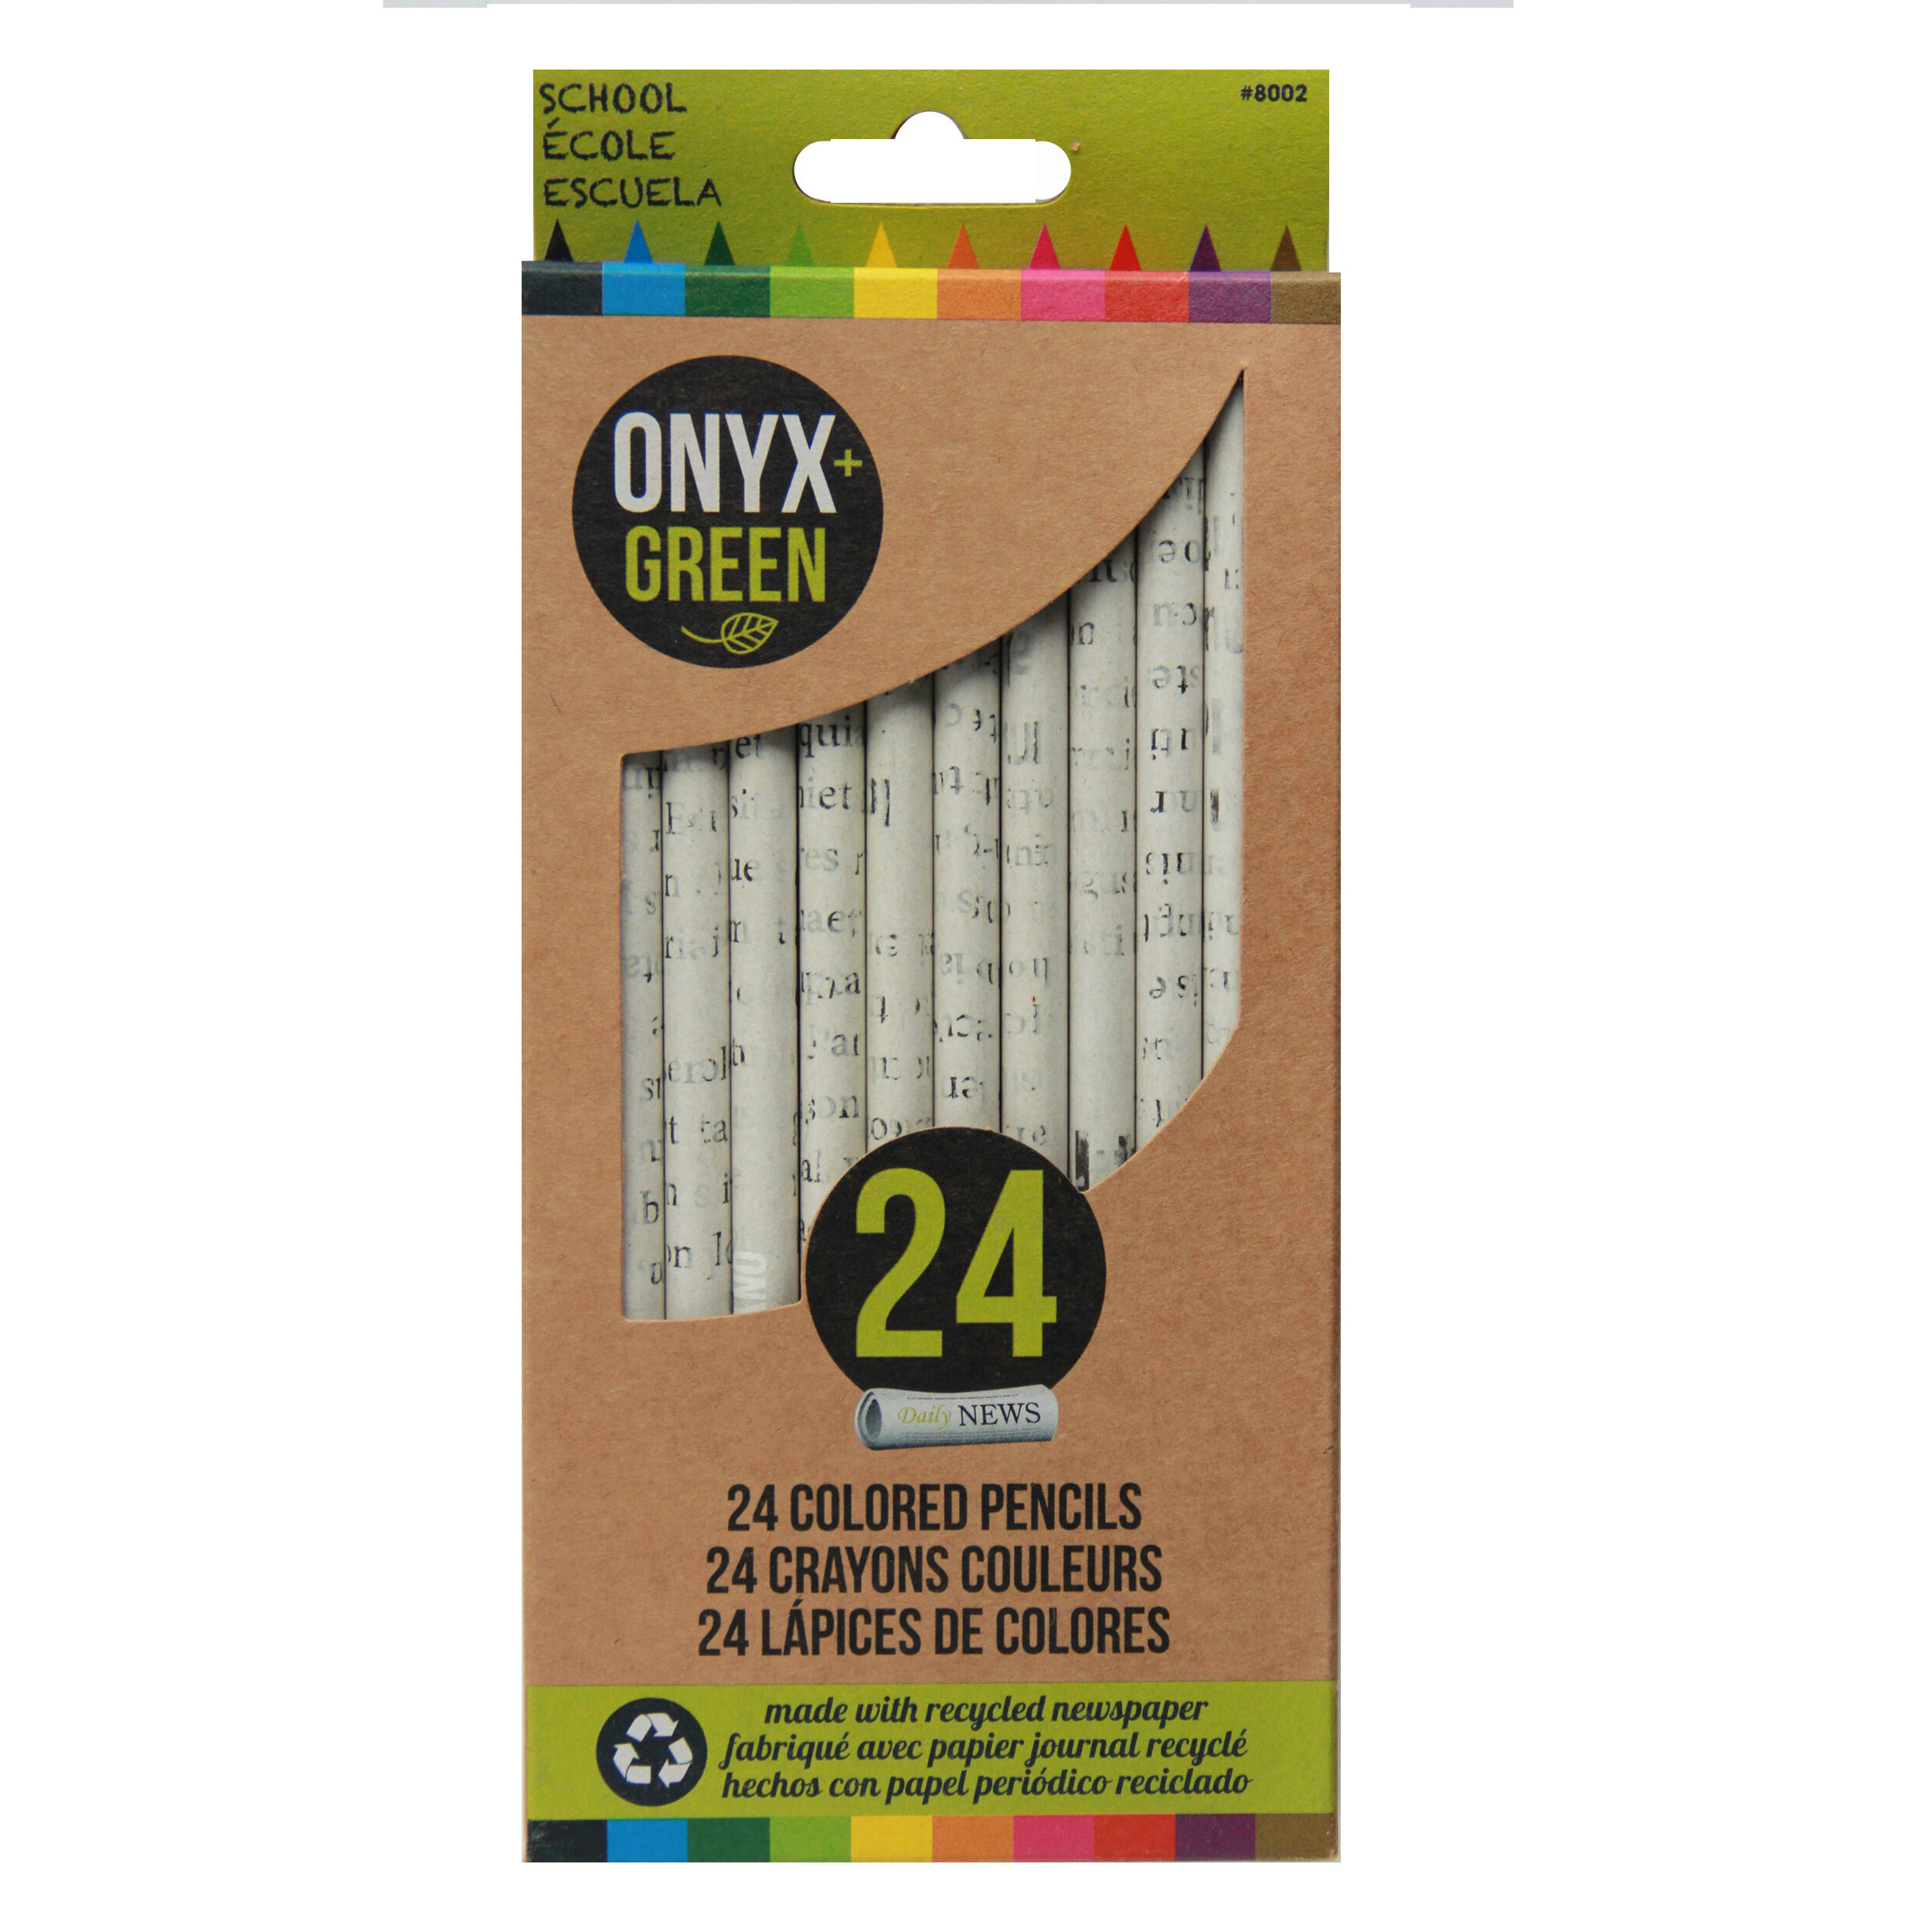 onyx-and-green-recycled-newspaper-colored-pencils.jpg